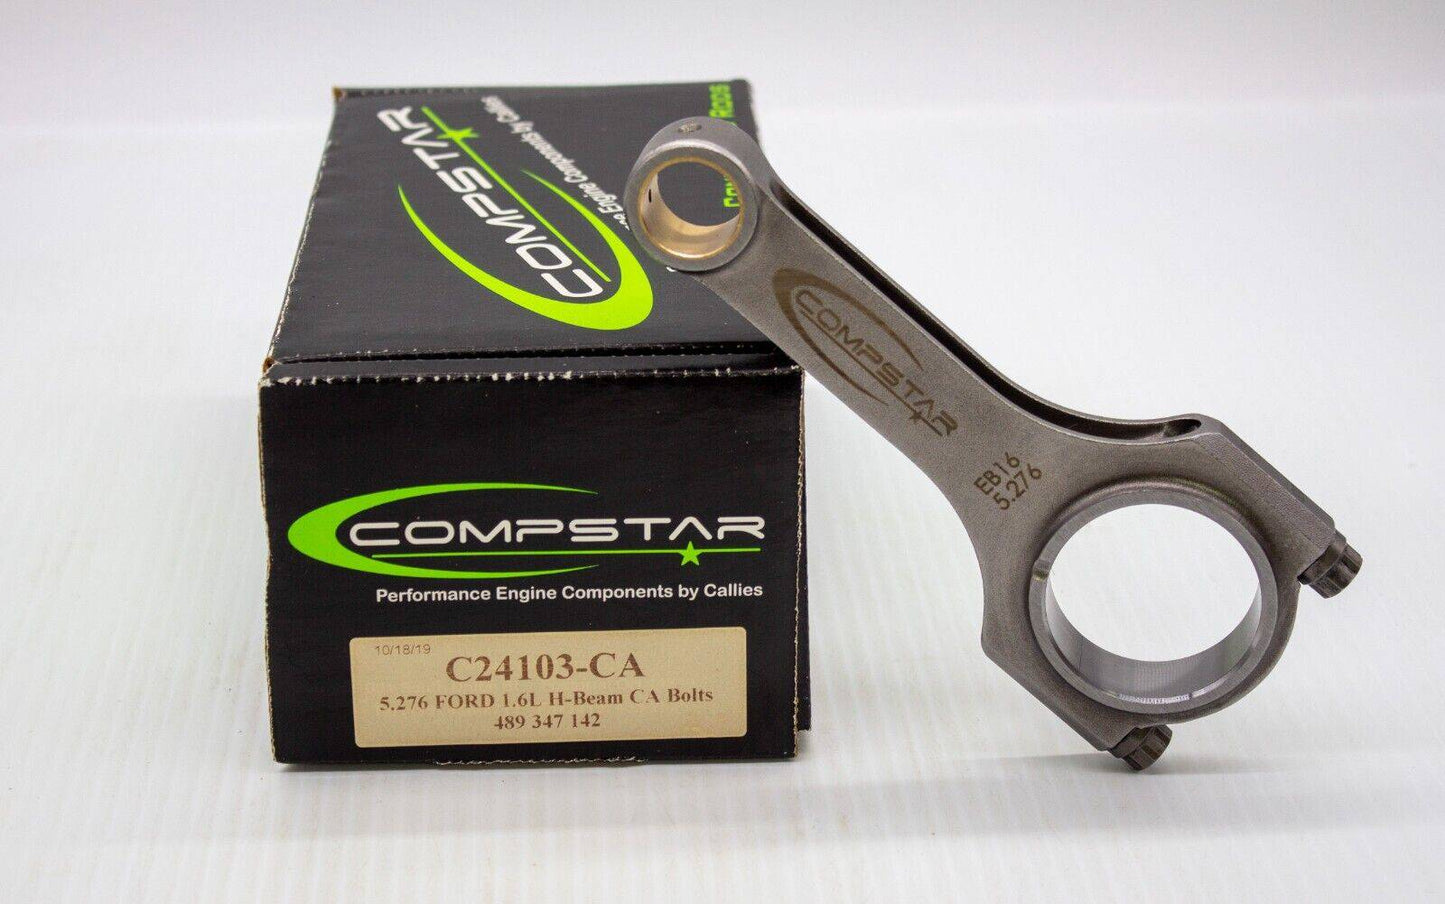 Callies Compstar Ford 1.6 L EcoBoost H-Beam Connecting Rod Length 134mm With ARP625+